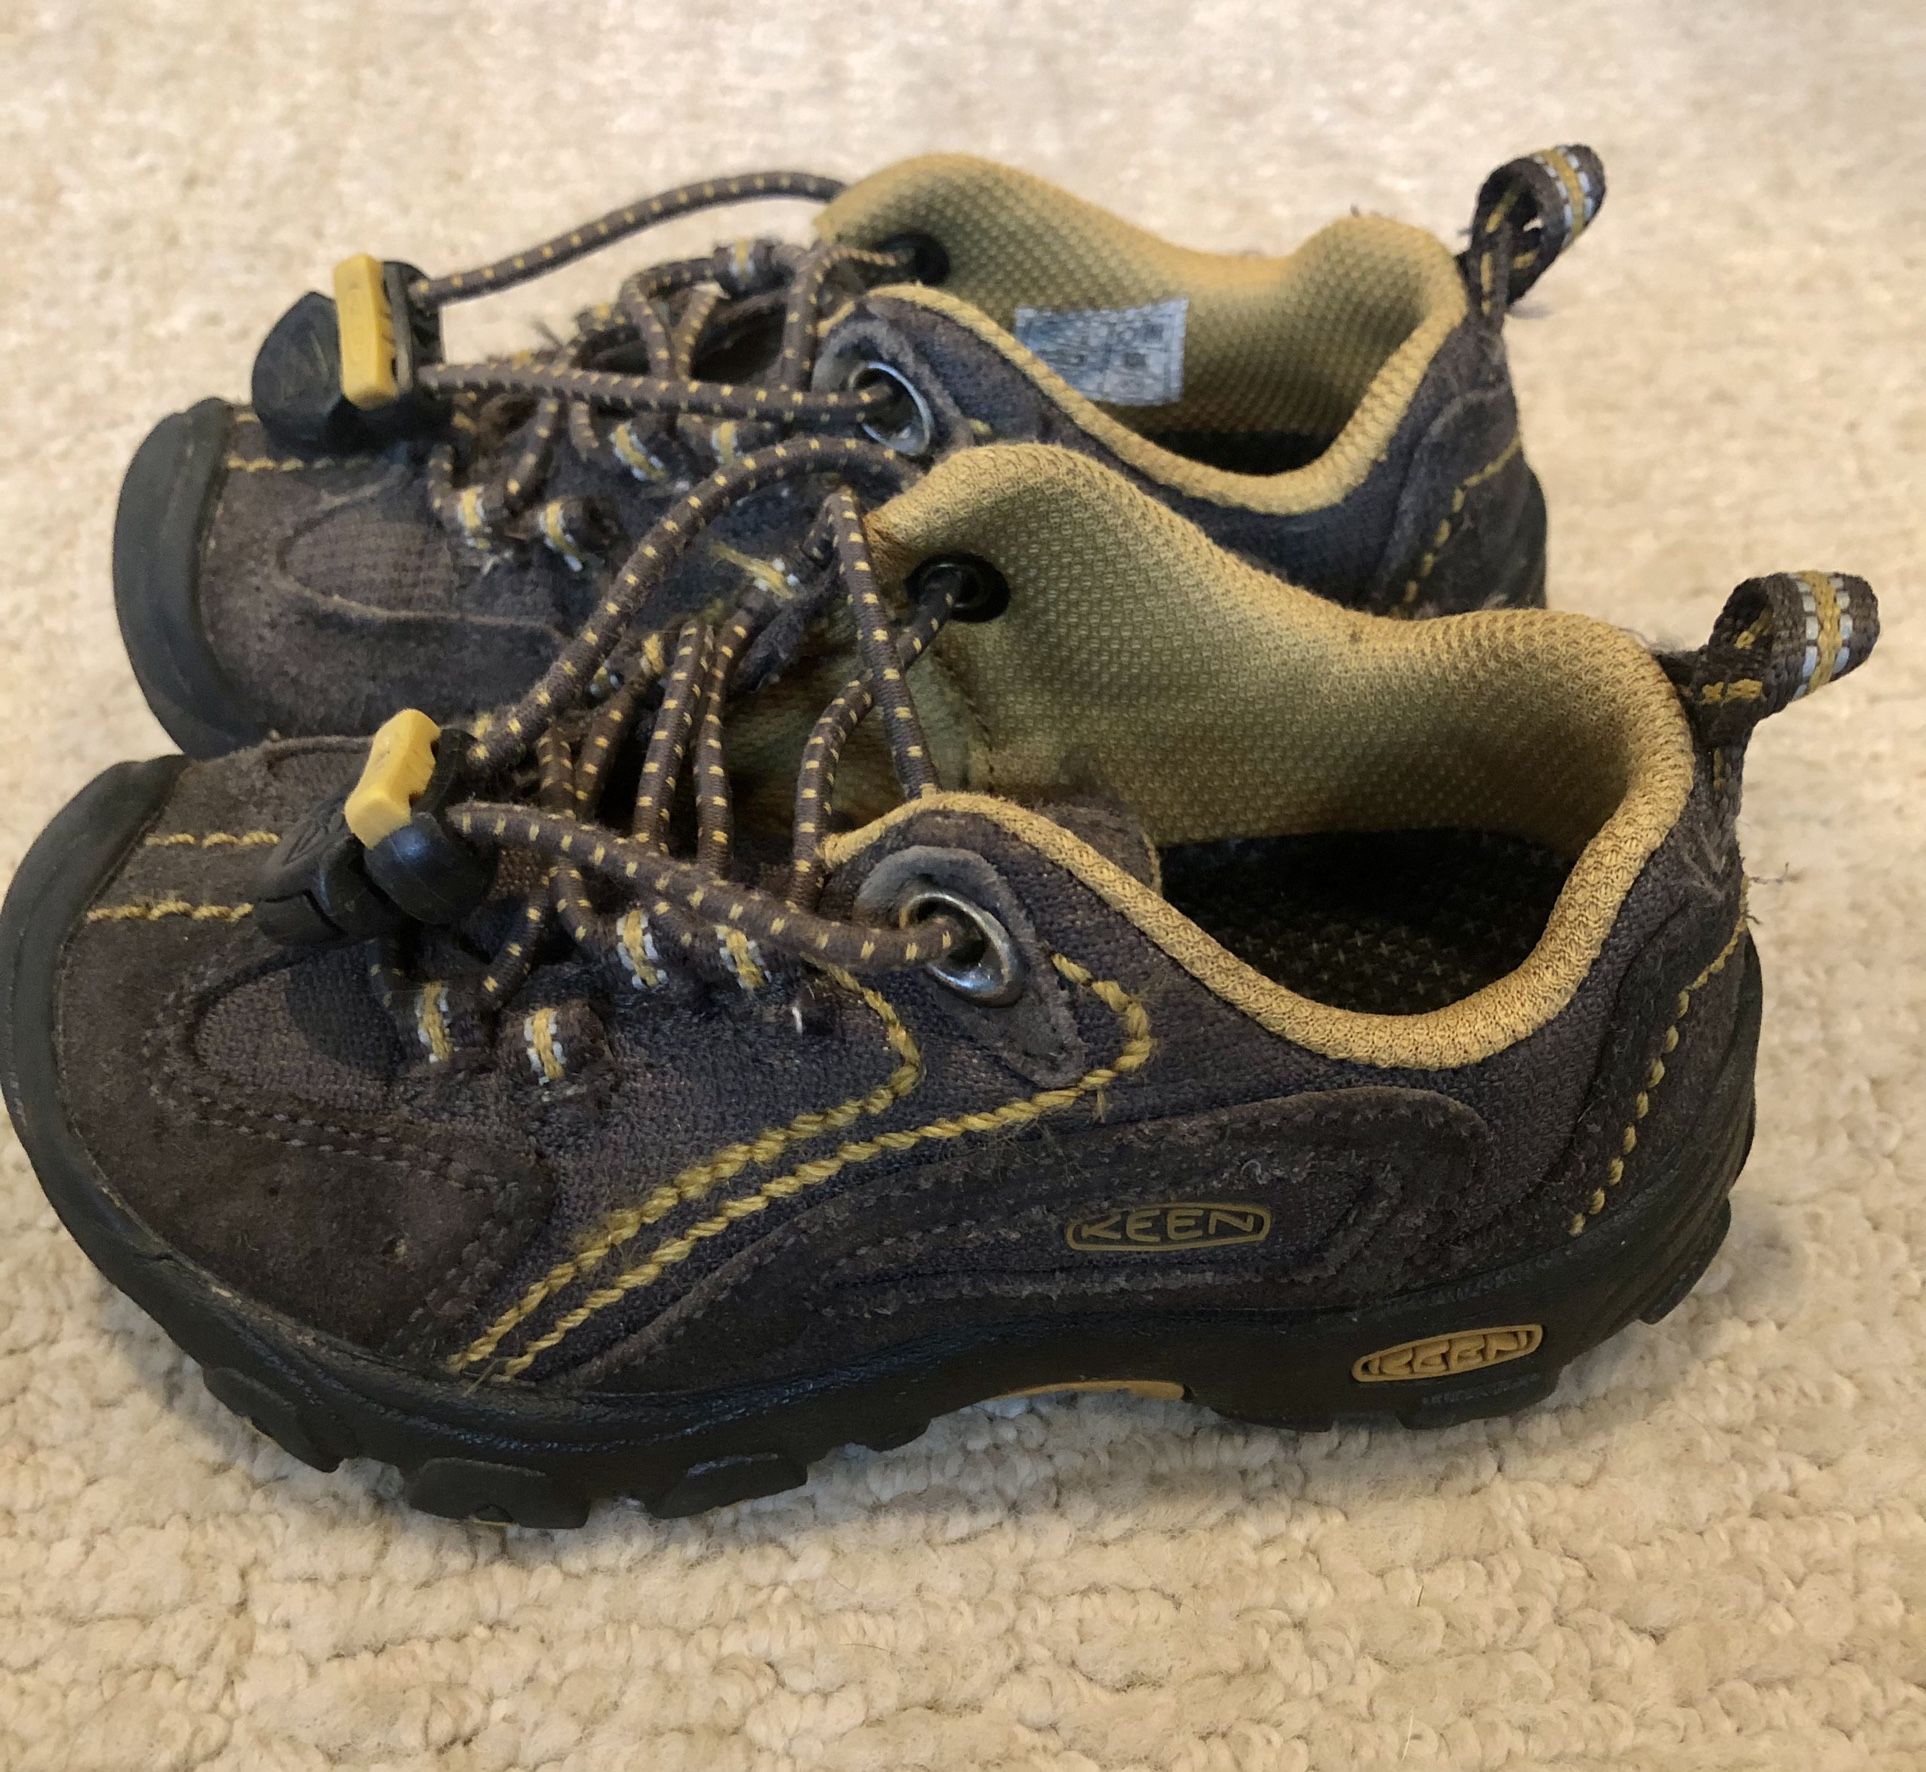 Keen Toddler Shoes, Size US 8